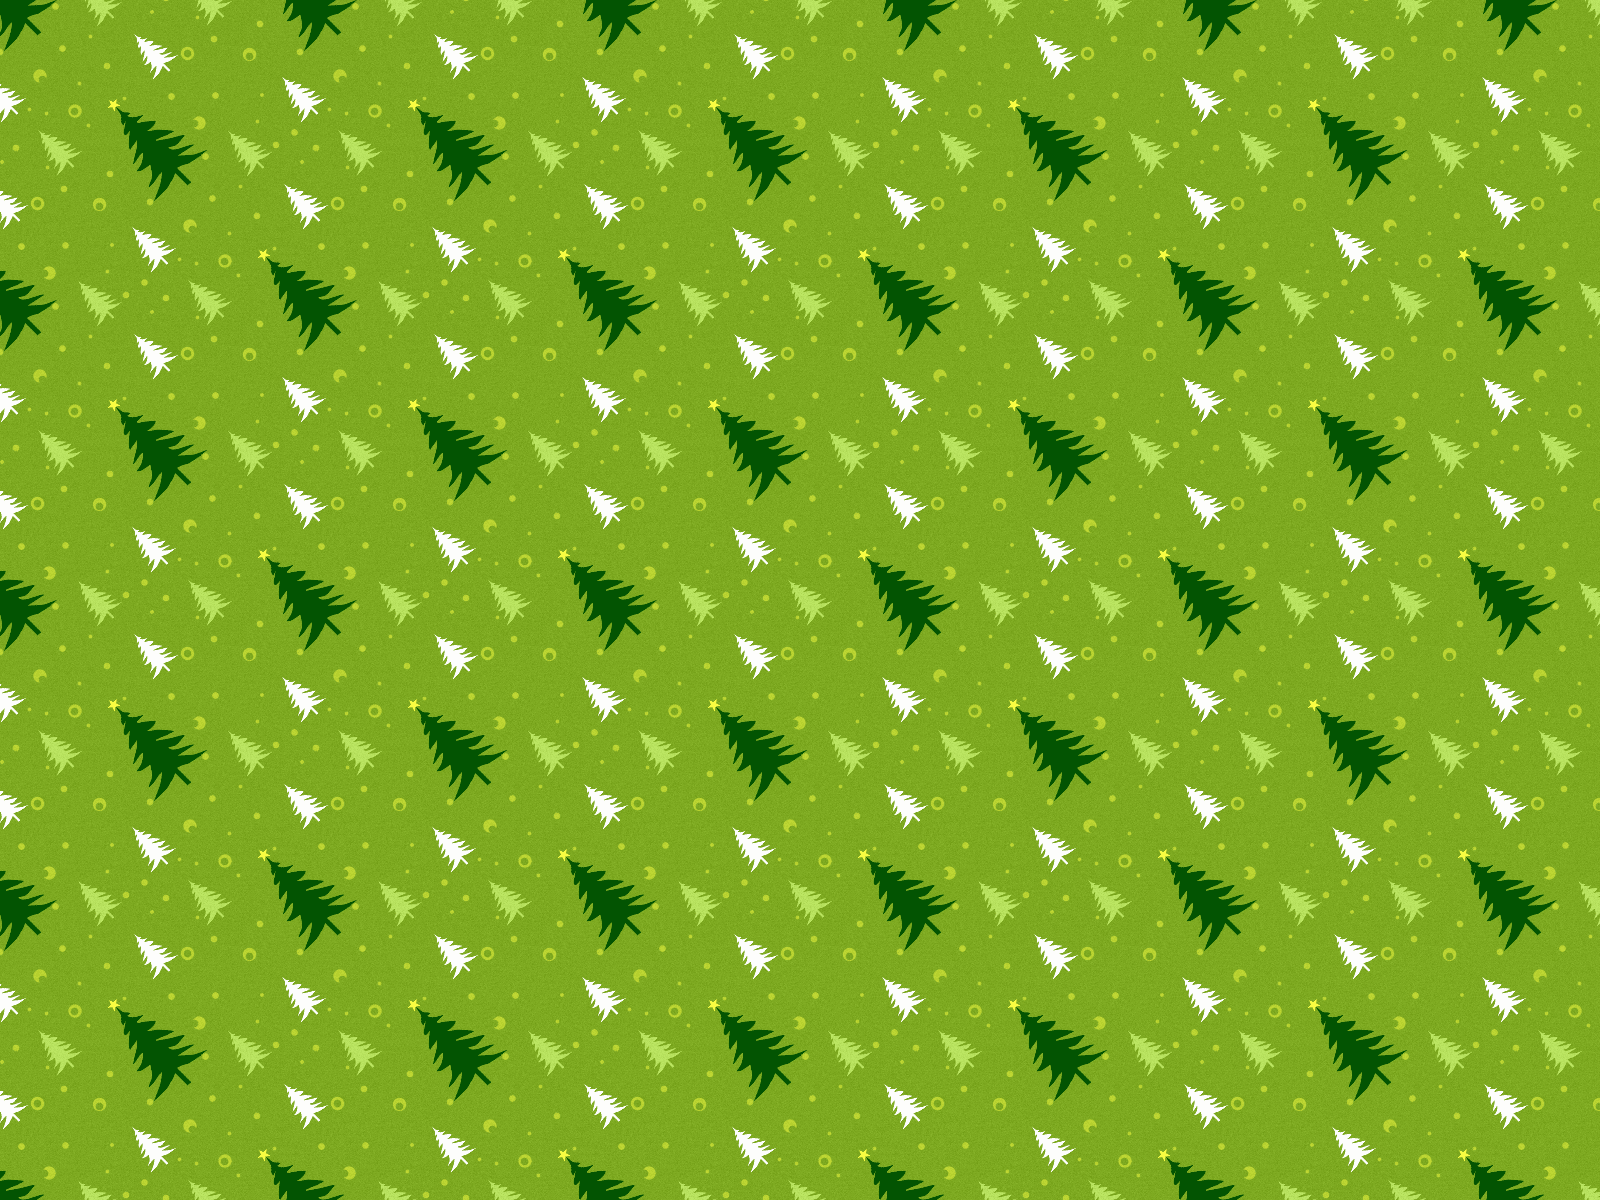  Christmas Backgrounds Wallpapers Photoshop Patterns 1600x1200